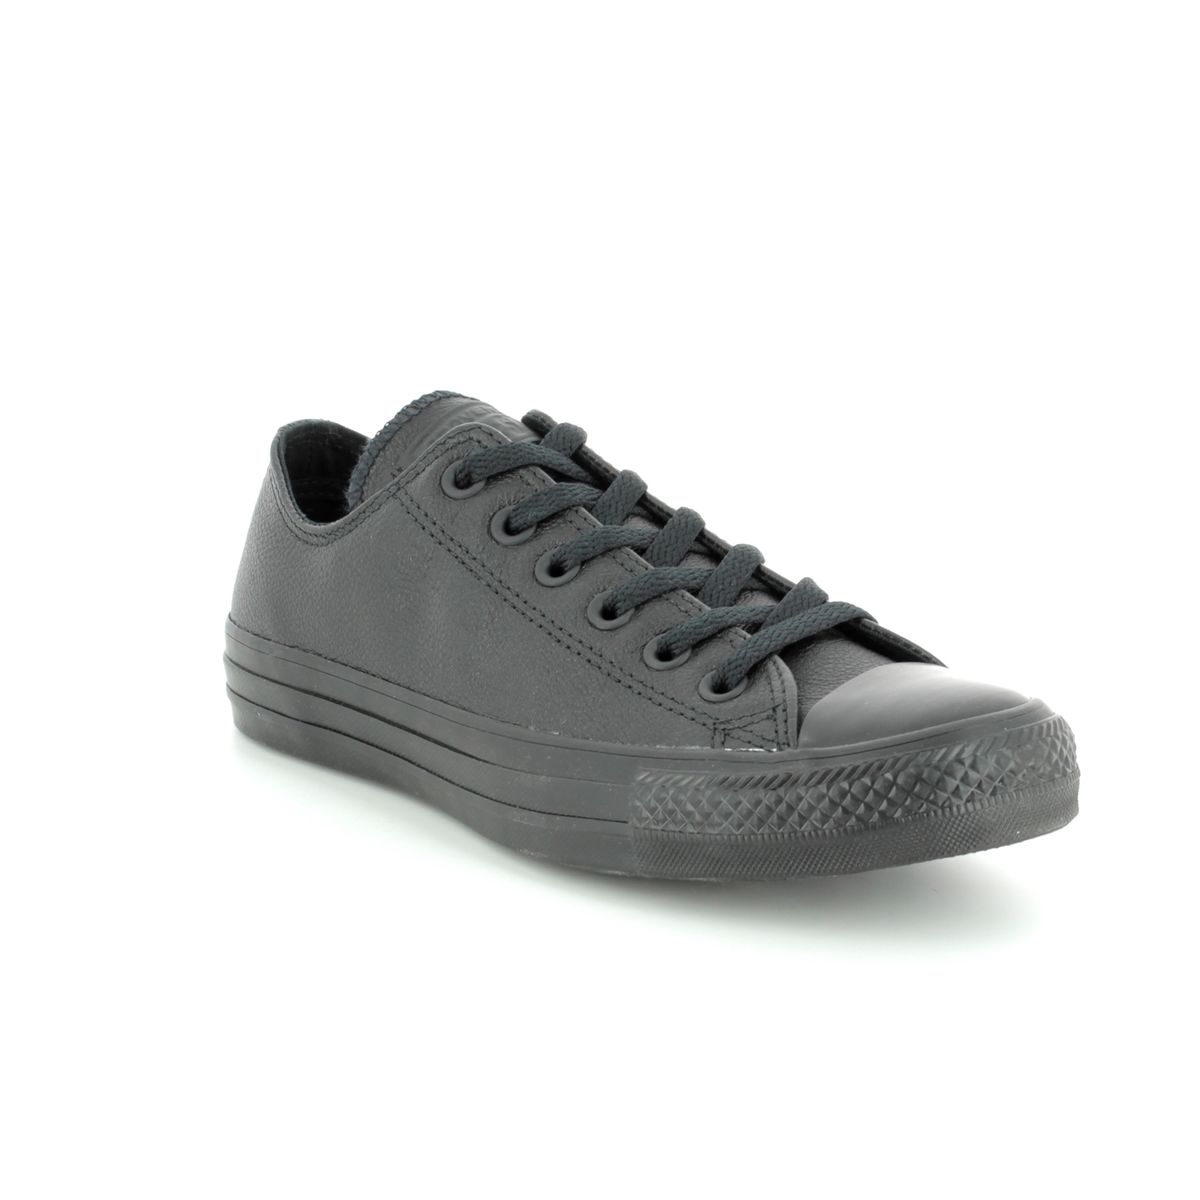 Converse Allstar Ox Black Mens trainers 135253C-001 in a Plain Leather in Size 9